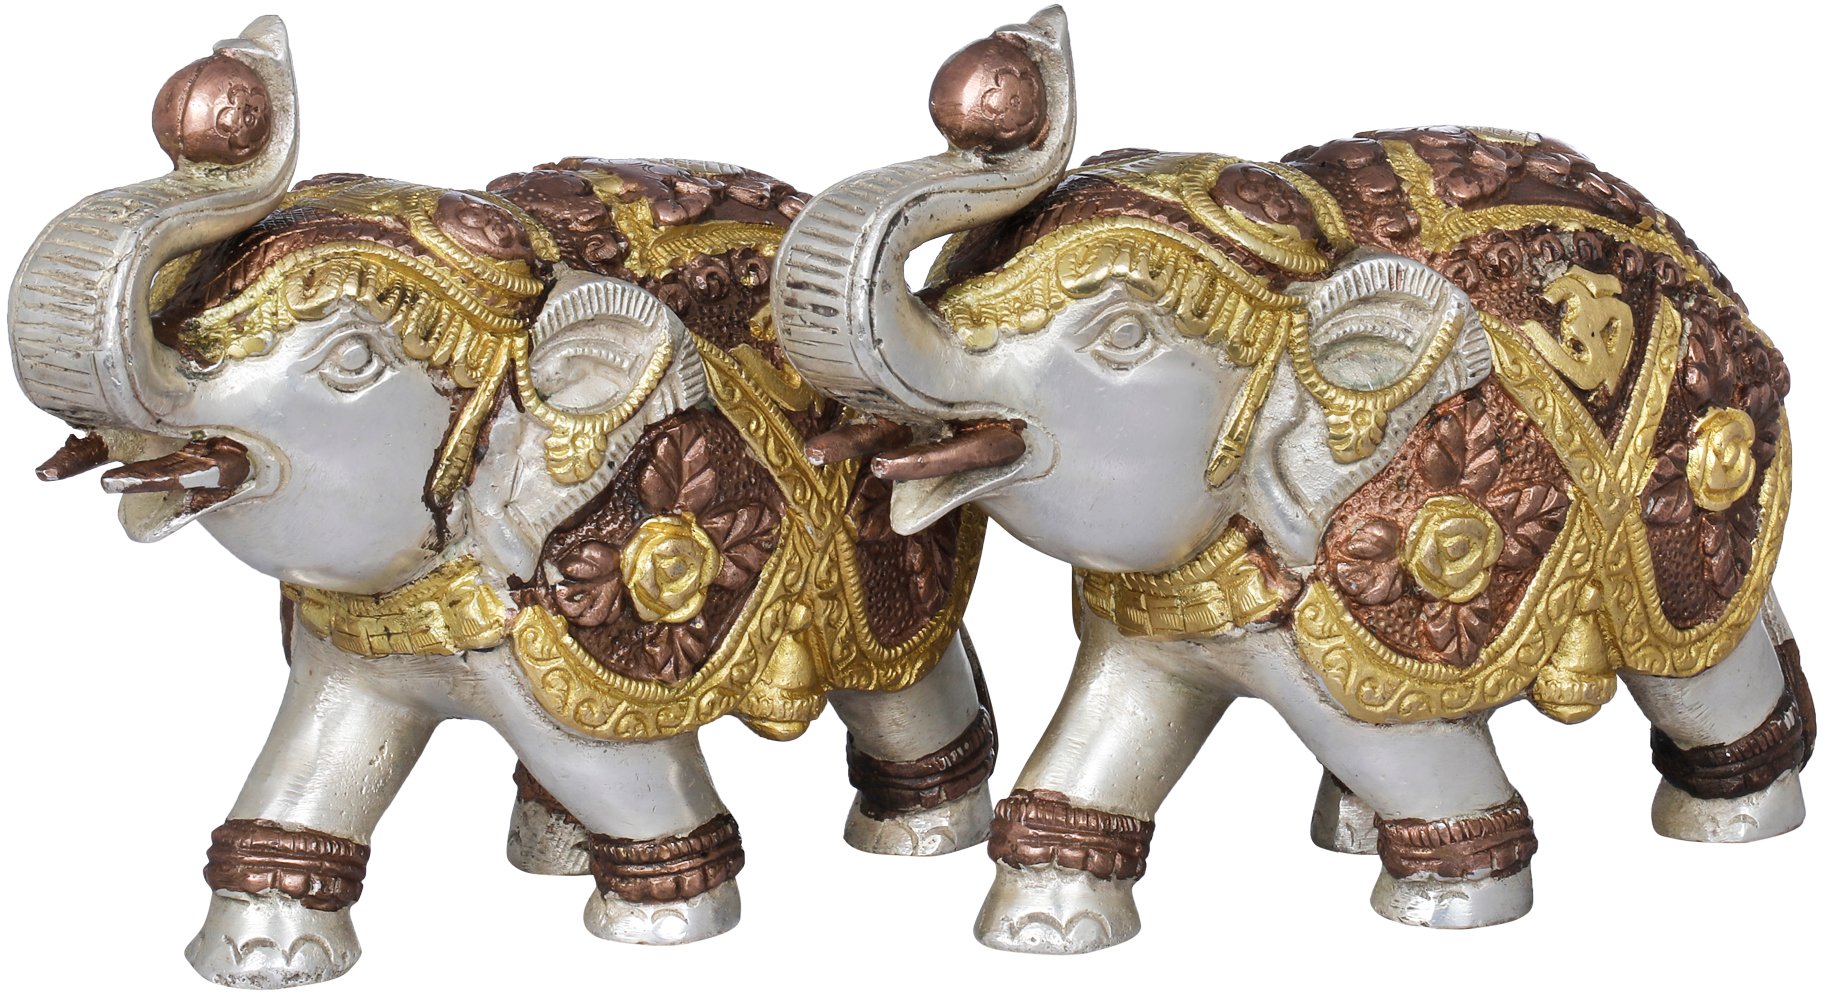 Wooden Elephant Statue Decorated Gold Colour & Gems raised & low trunk Asia Deco 